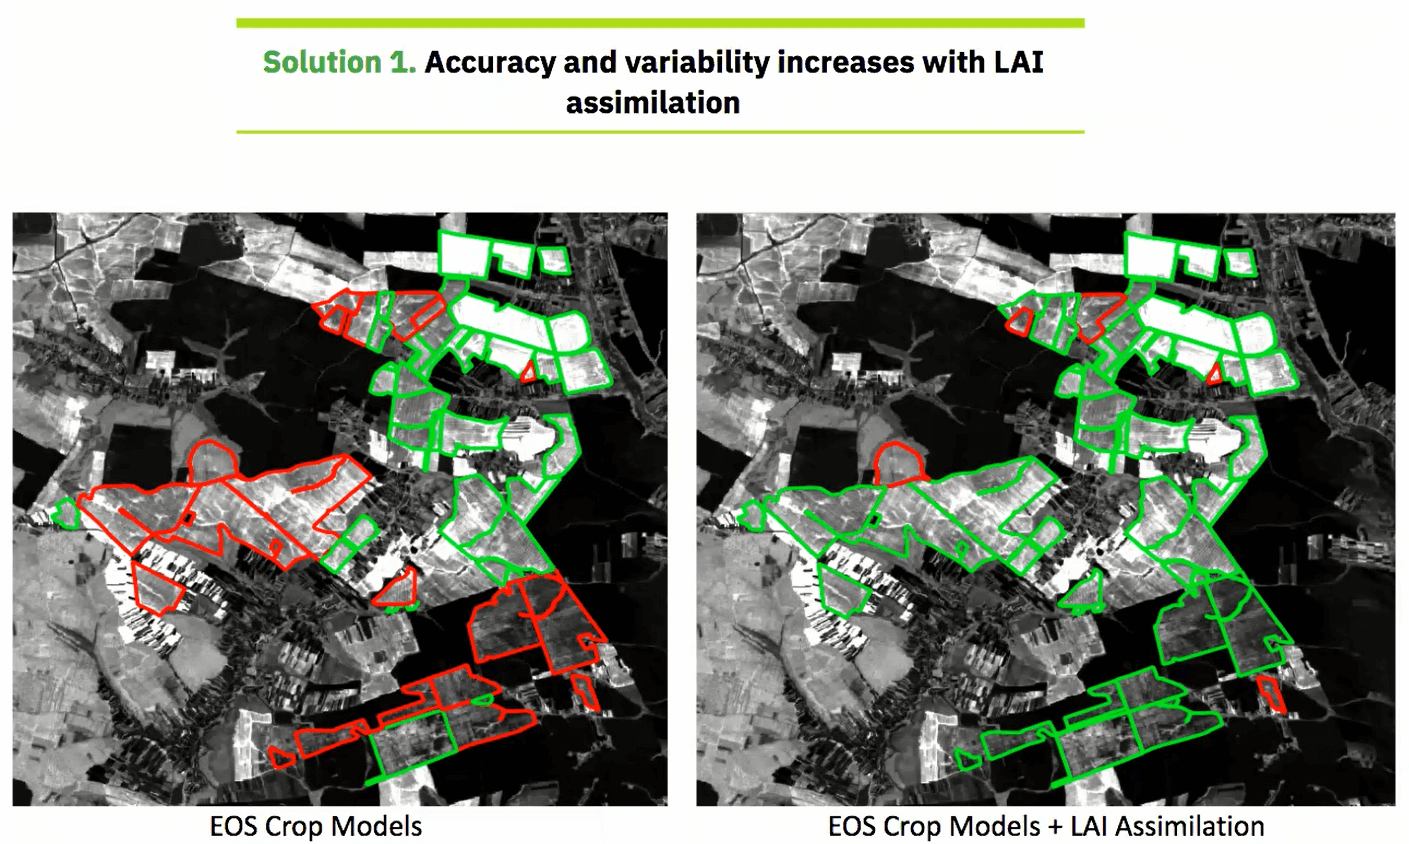 Graph showing how accuracy and variability increases with LAI assimilation.